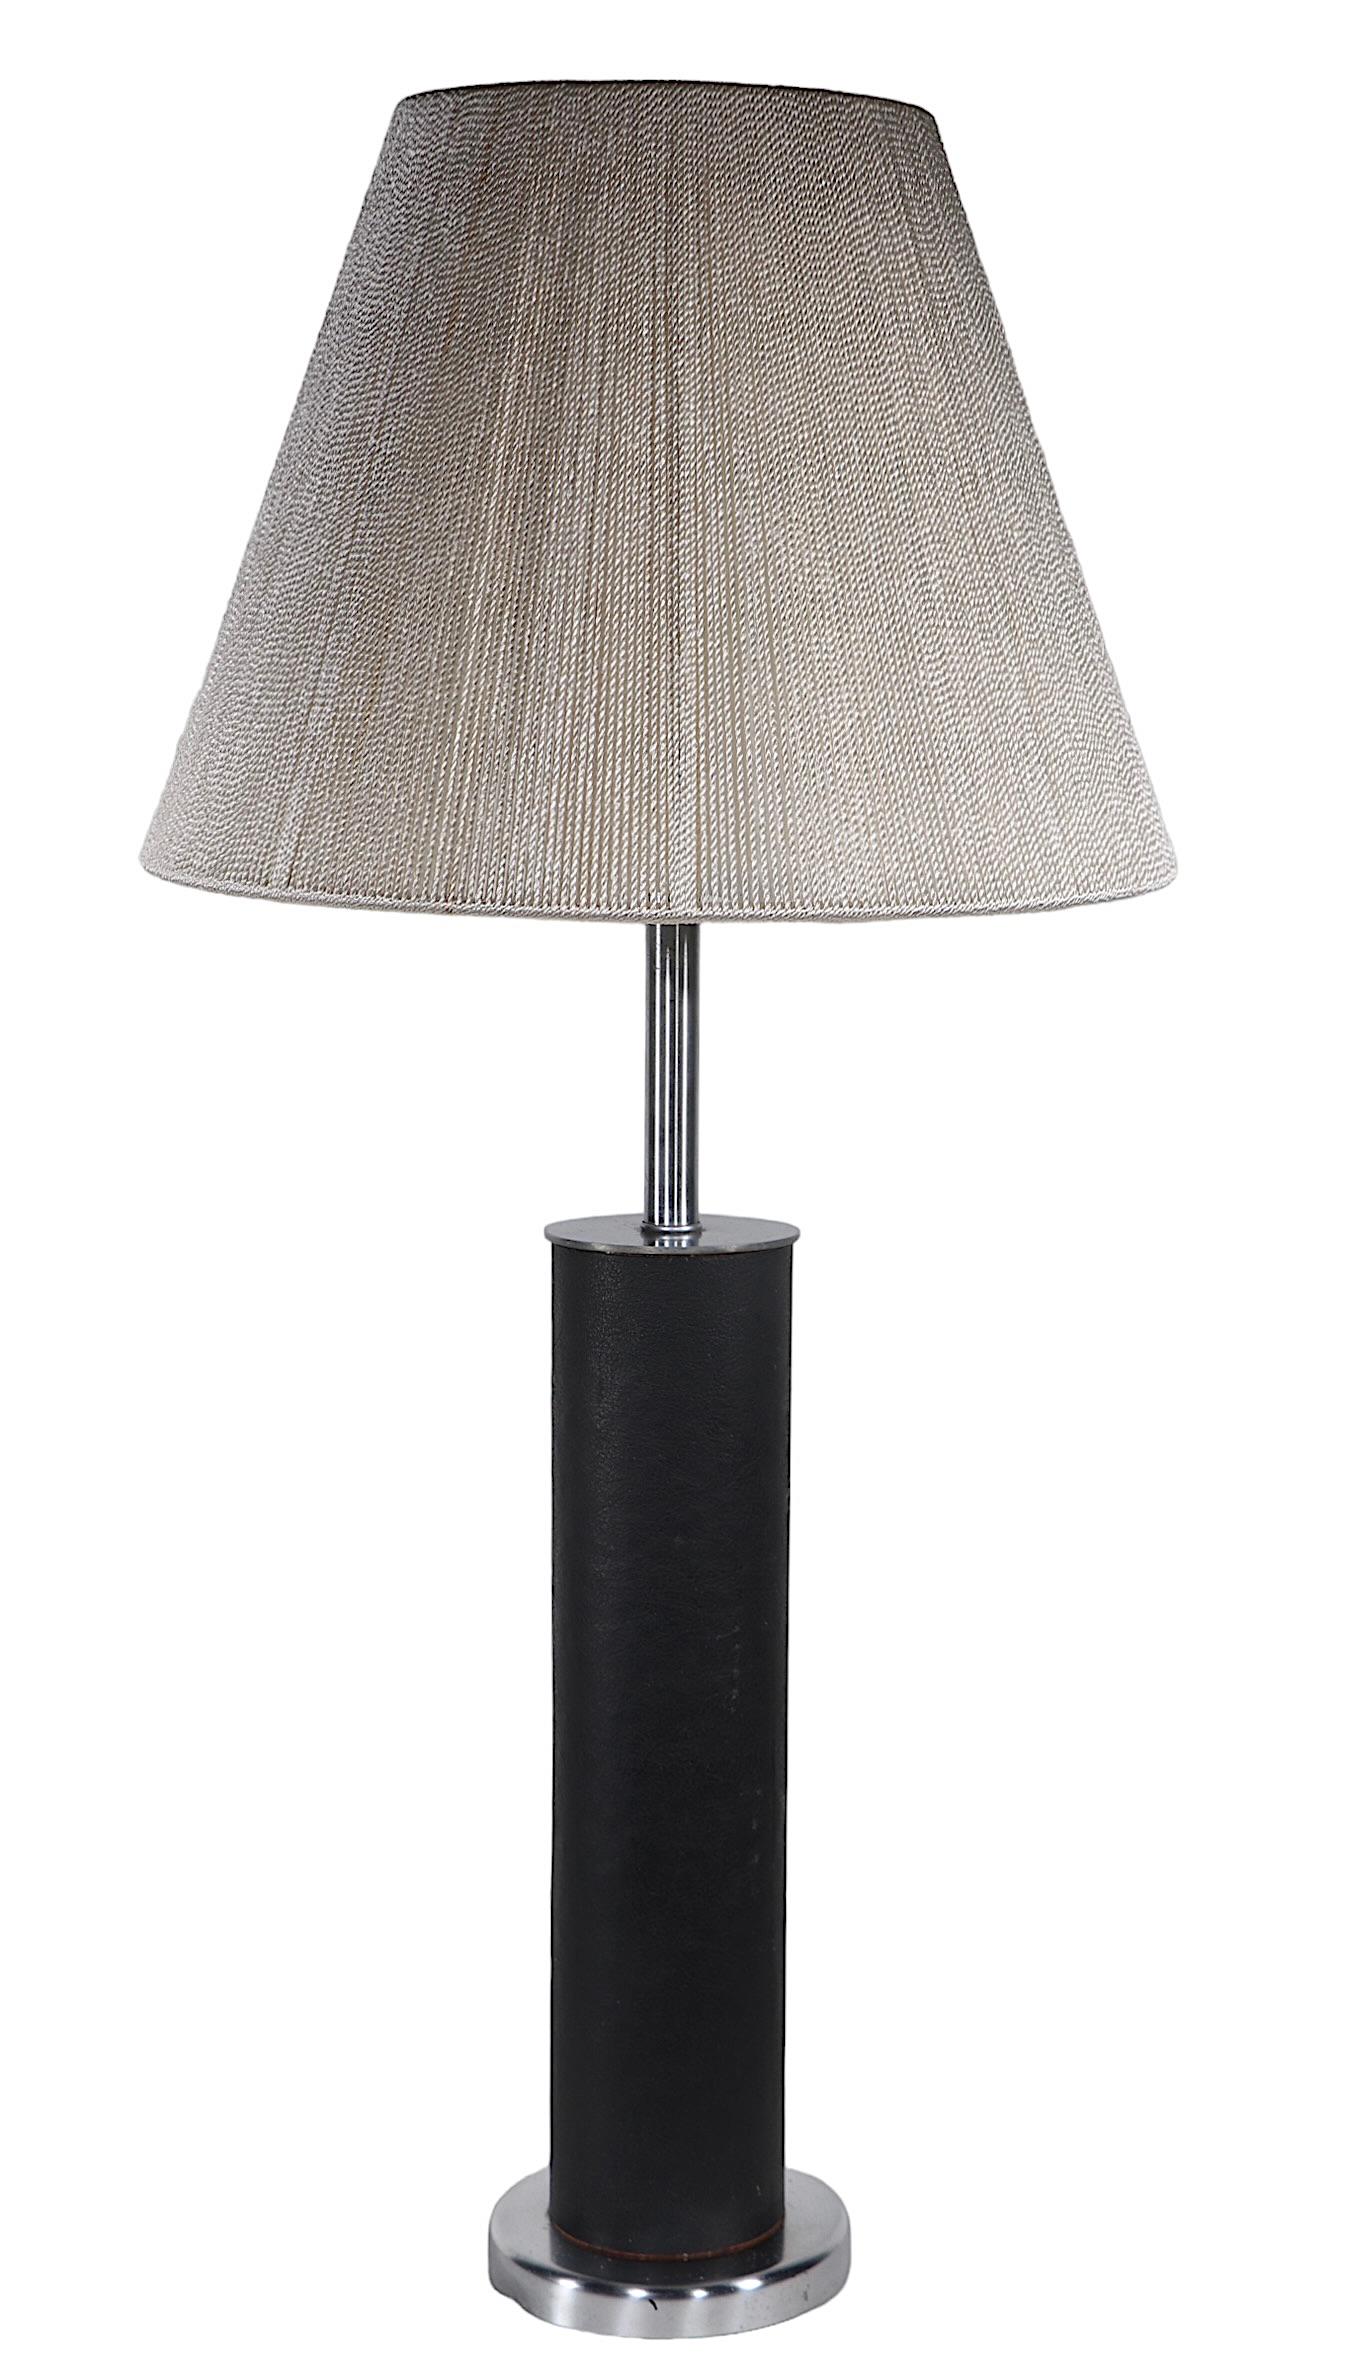  Modernist Leather and Steel Table Lamp by Walter Von Nessen c 1960's  For Sale 12